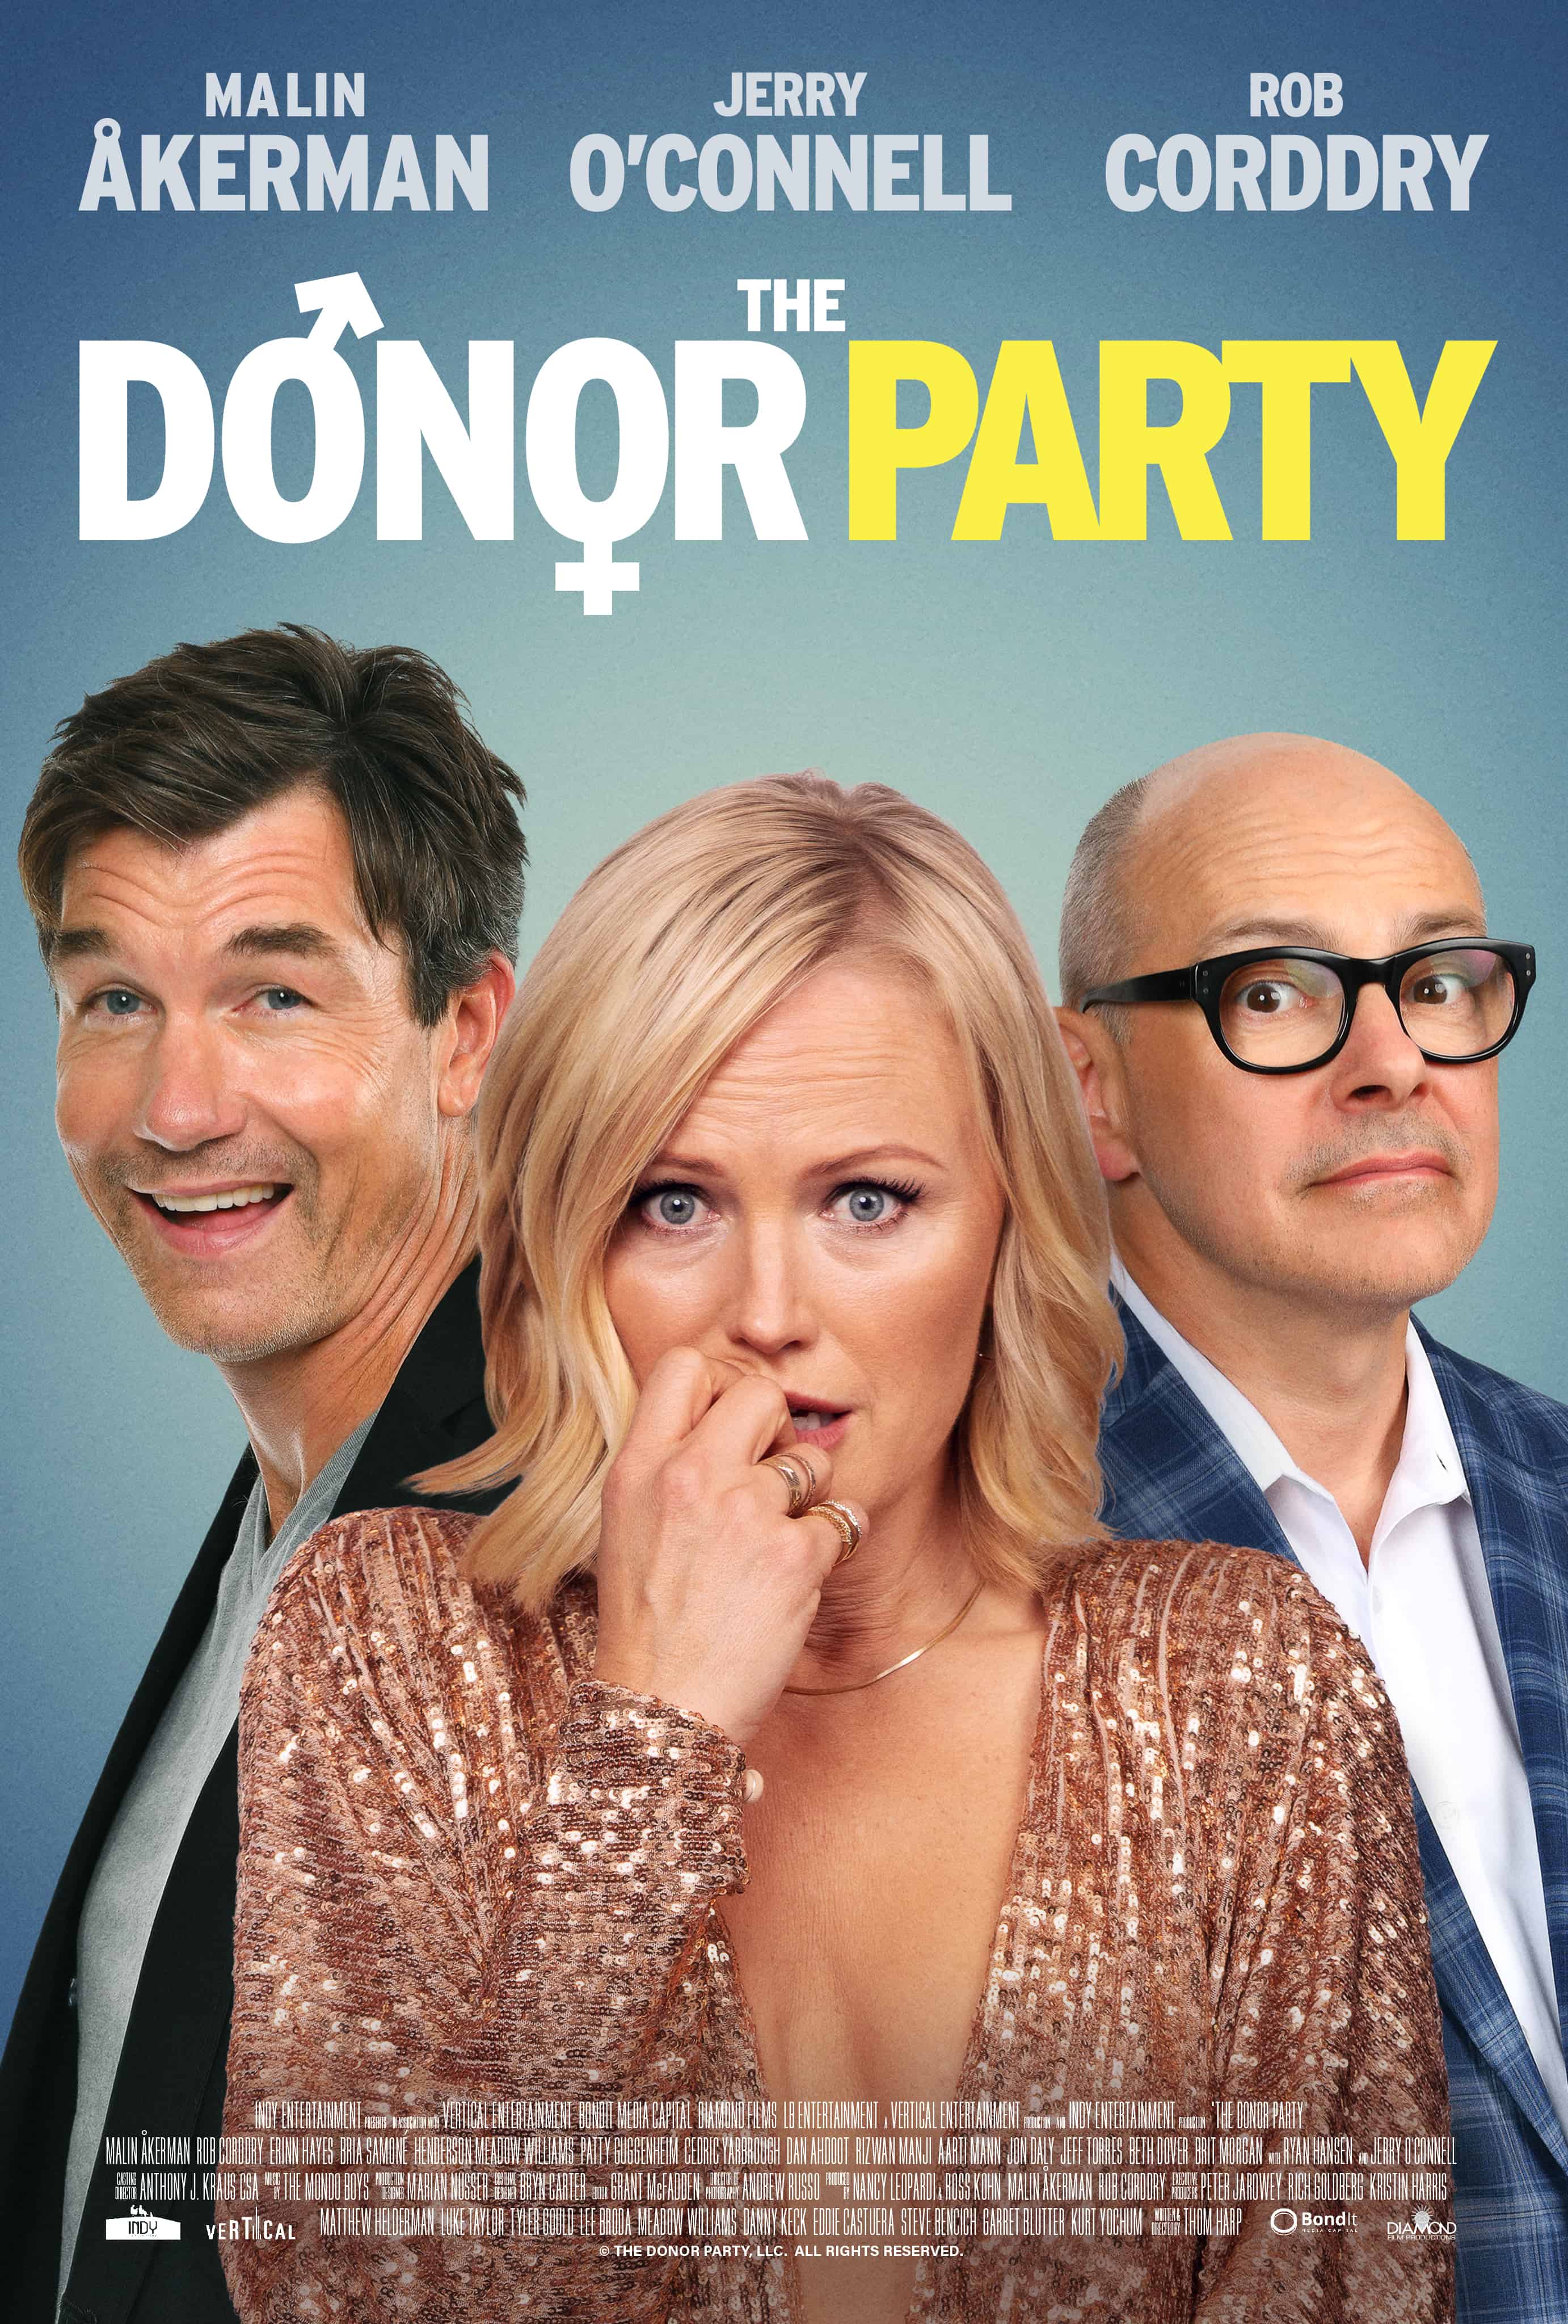 The Donor Party has a new clip! 20